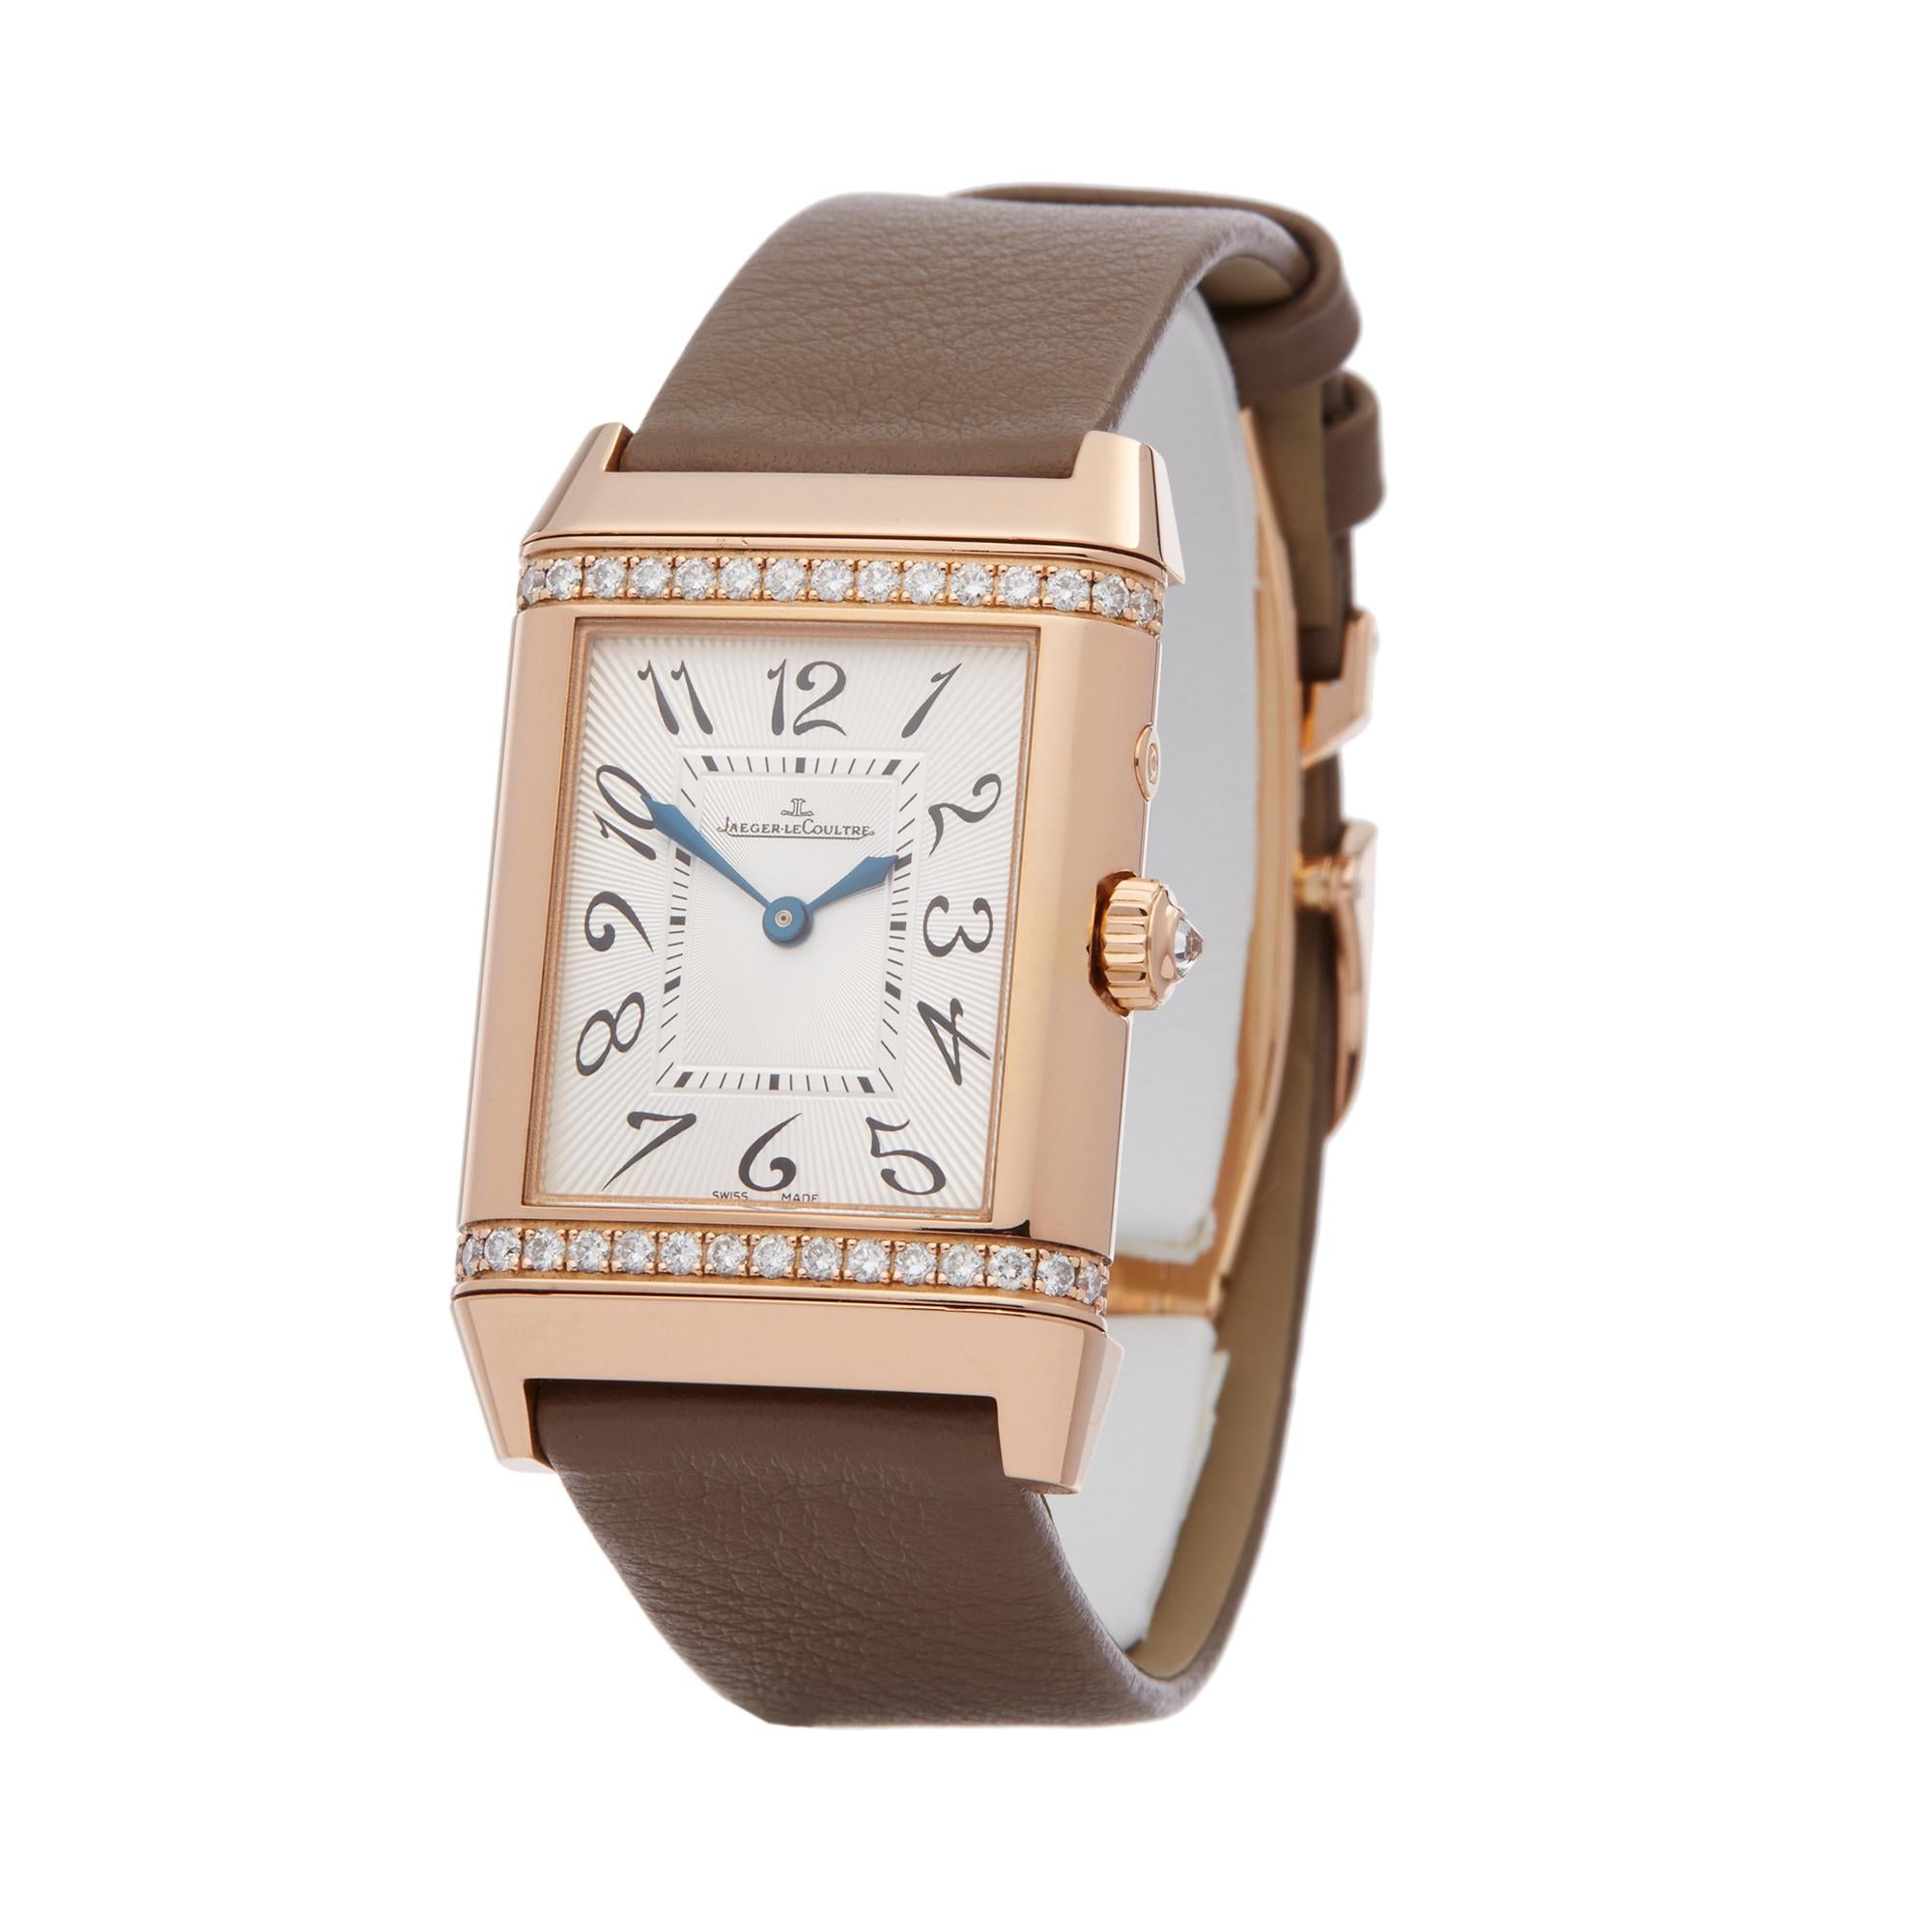 Ref: W6265
Manufacturer: Jaeger-LeCoultre
Model: Reverso
Model Ref: 269.254
Age: 29th July 2014
Gender: Ladies
Complete With: Box, Manuals & Guarantee
Dial: Cream Arabic
Glass: Sapphire Crystal
Movement: Mechanical Wind
Water Resistance: To